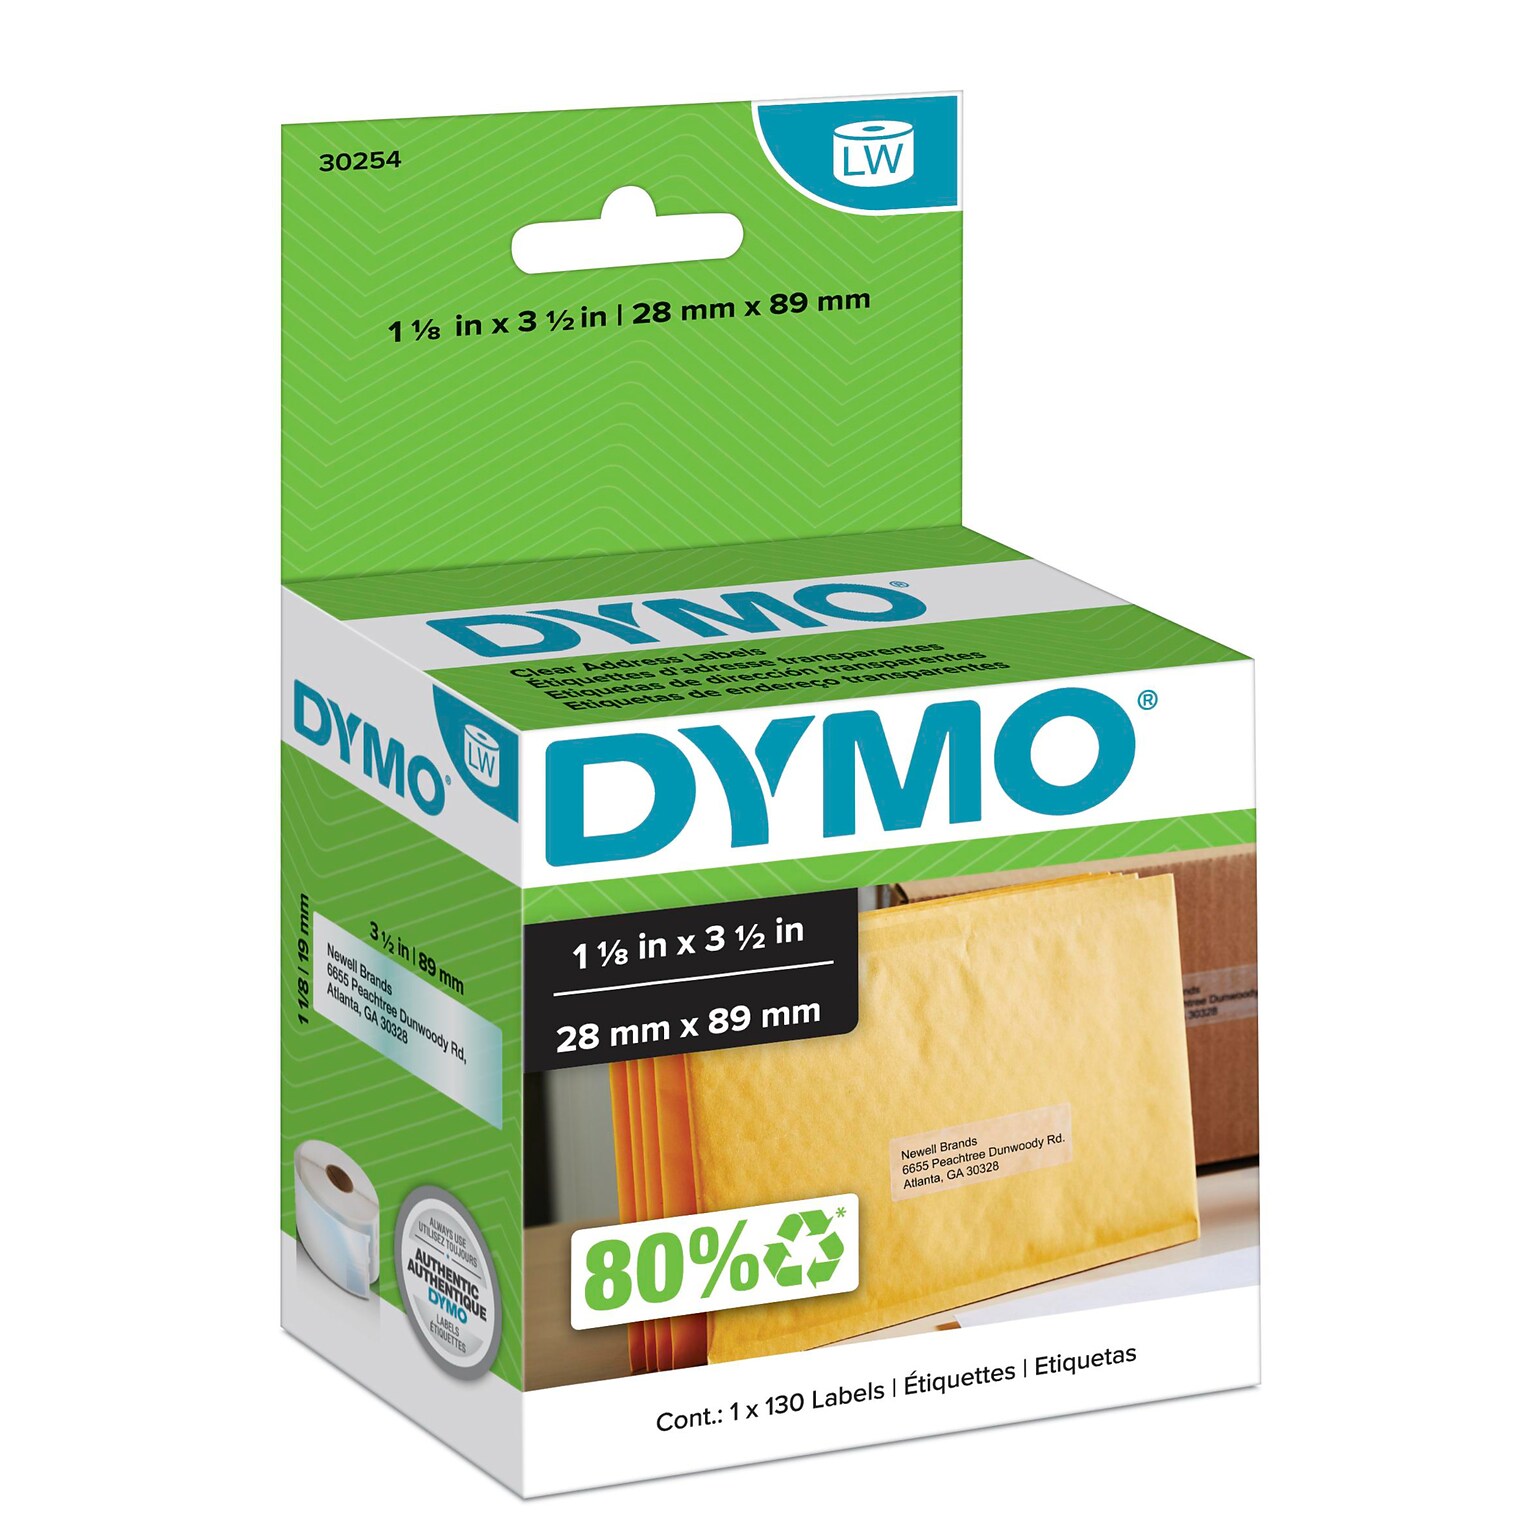 DYMO LabelWriter 30254 Mailing Address Labels, 3-1/2 x 1-1/8, Black on Clear, 130 Labels/Roll (30254)